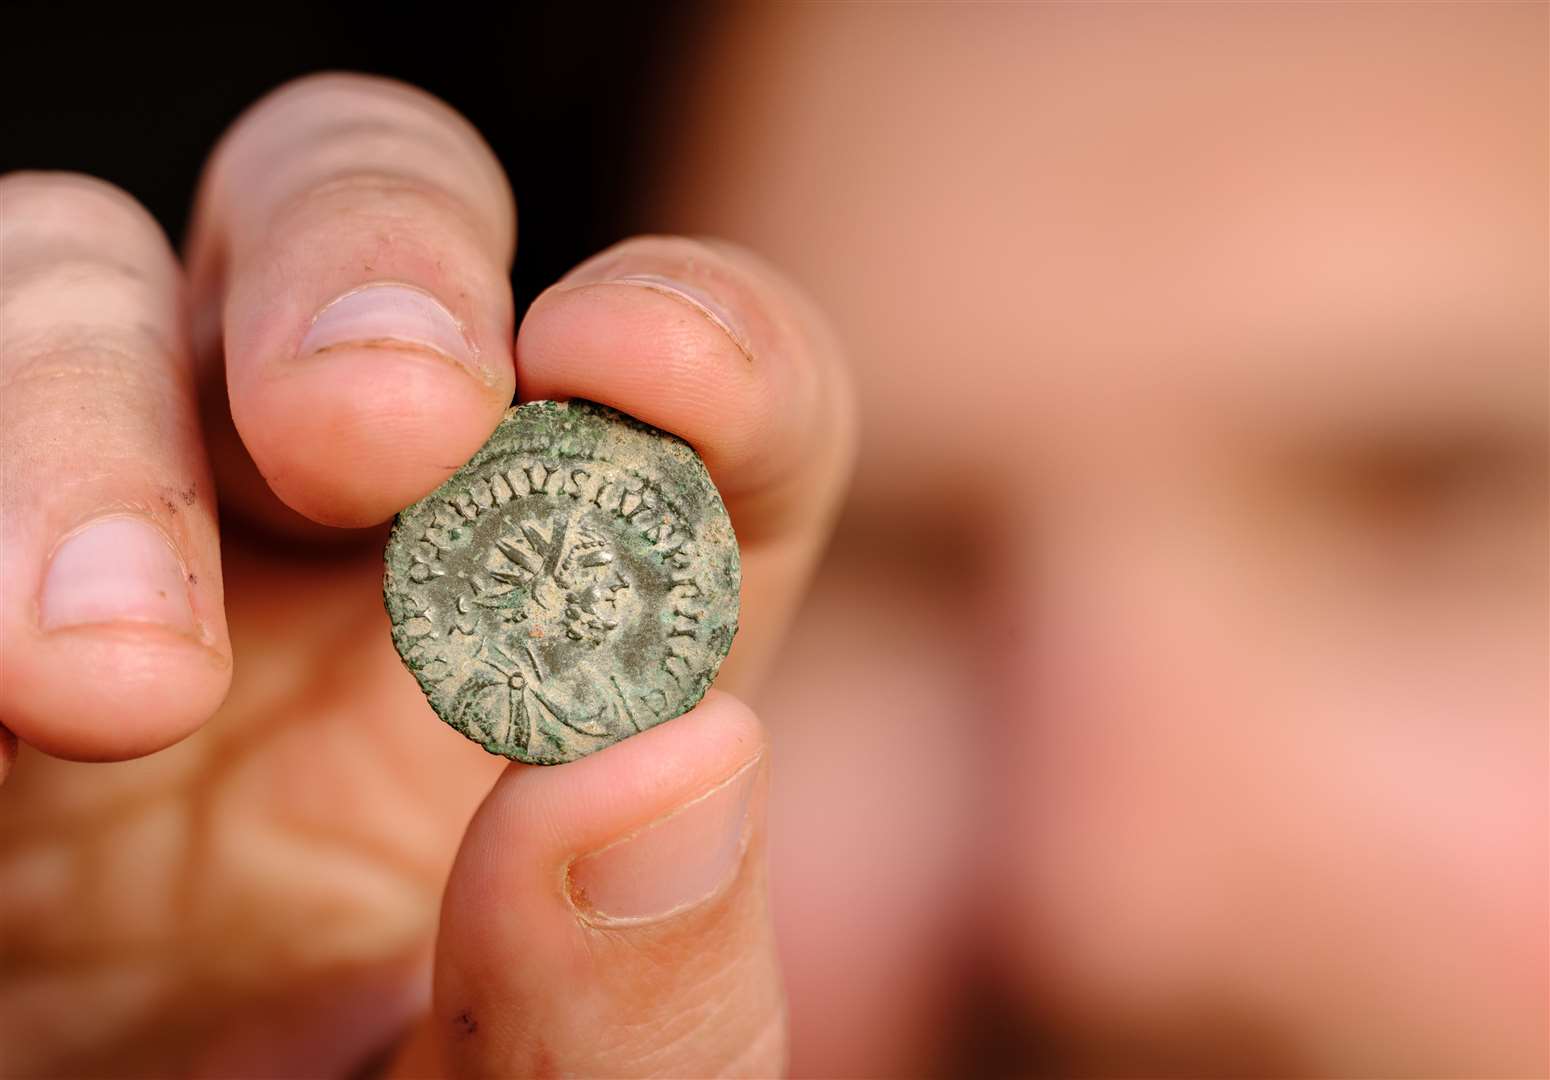 Other items like Roman coins and pottery fragments were discovered (English Heritage/PA)